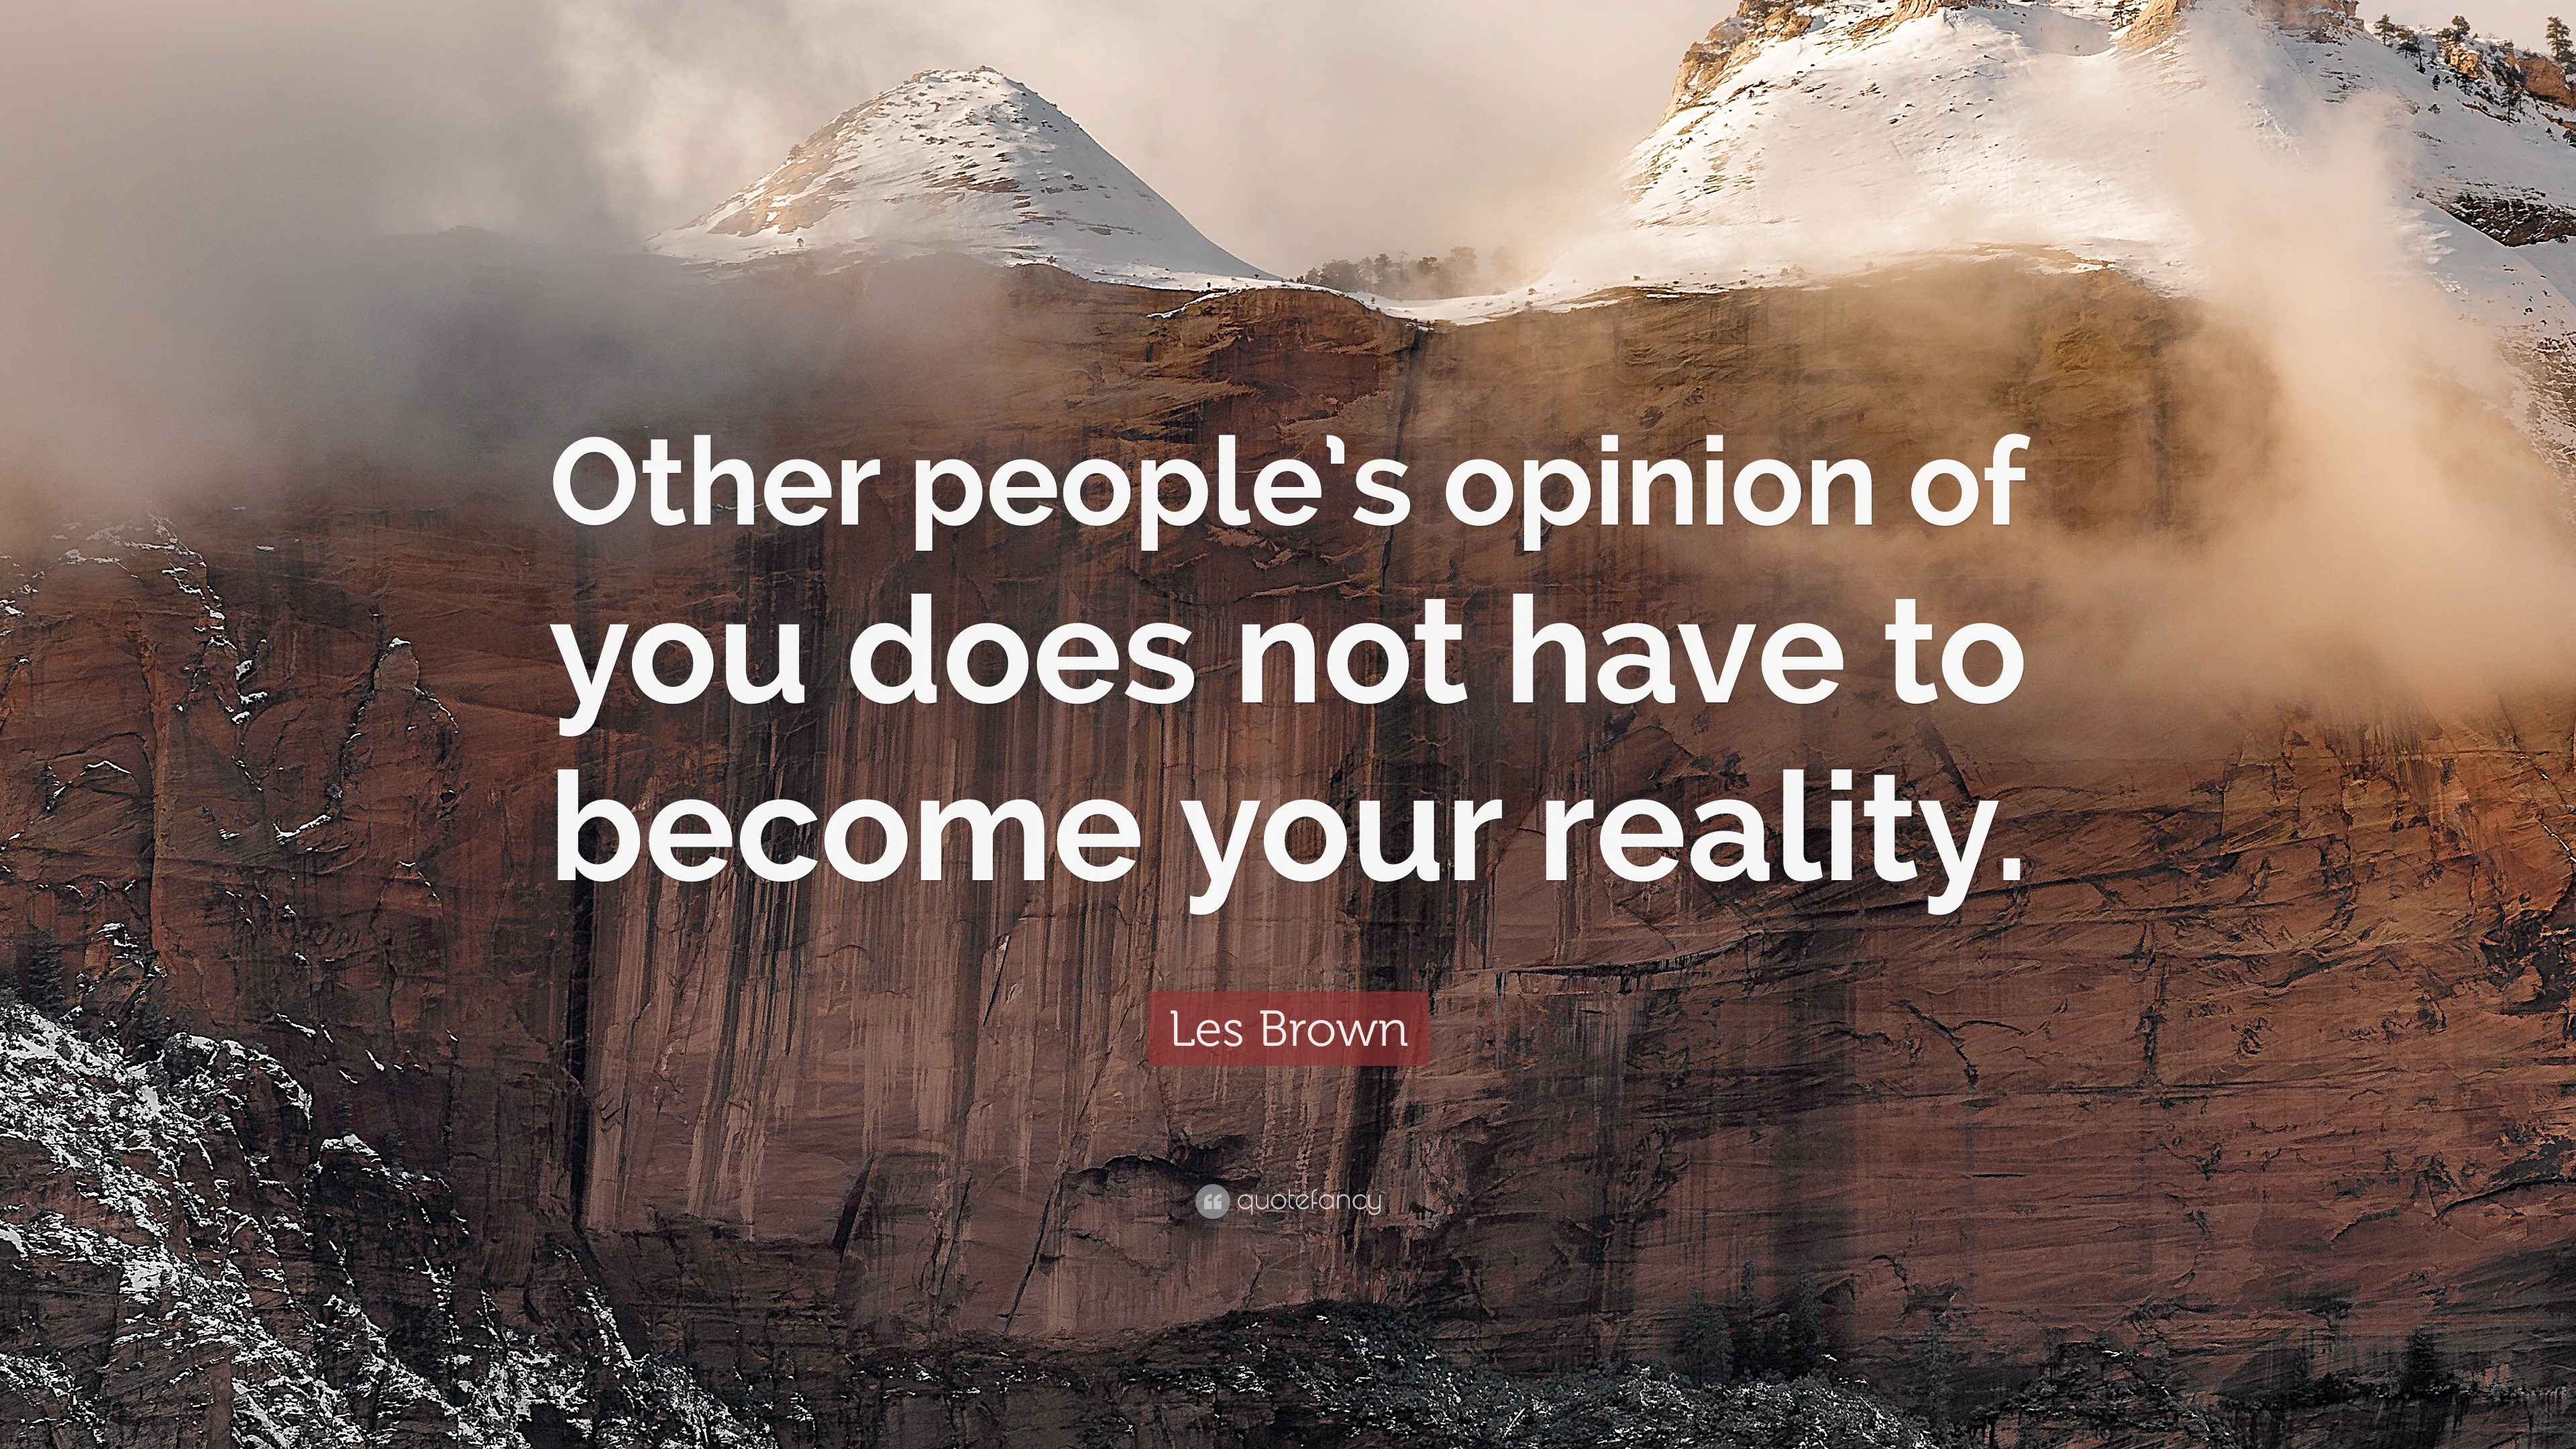 Les Brown Quote “other Peoples Opinion Of You Does Not Have To Become Your Reality” 